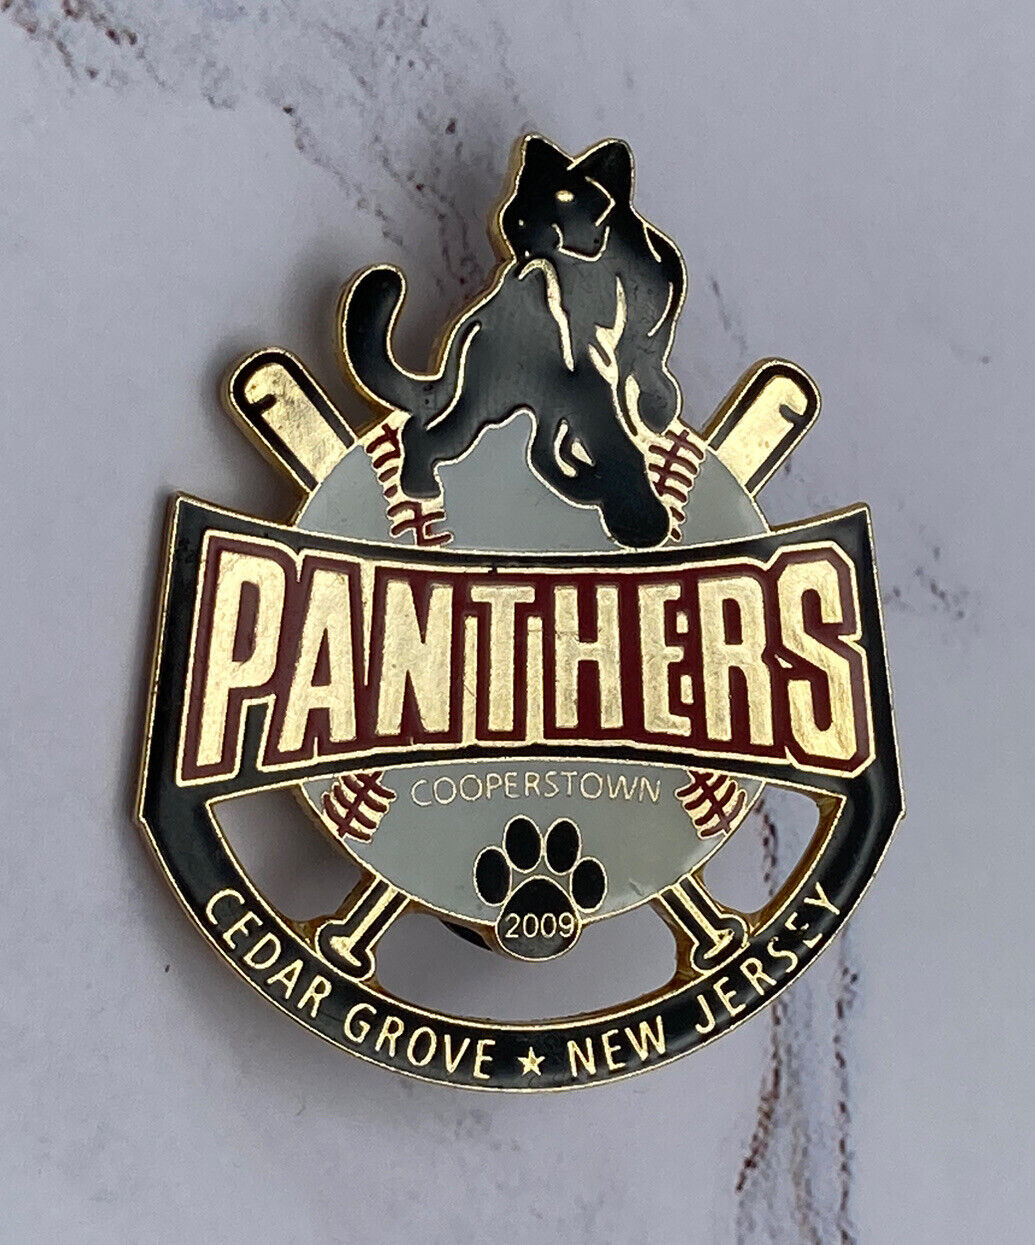 2009 Cooperstown Panthers Lapel/Hat Pin, Cedar Grove, NJ Baseball - 1 5/8” Wide